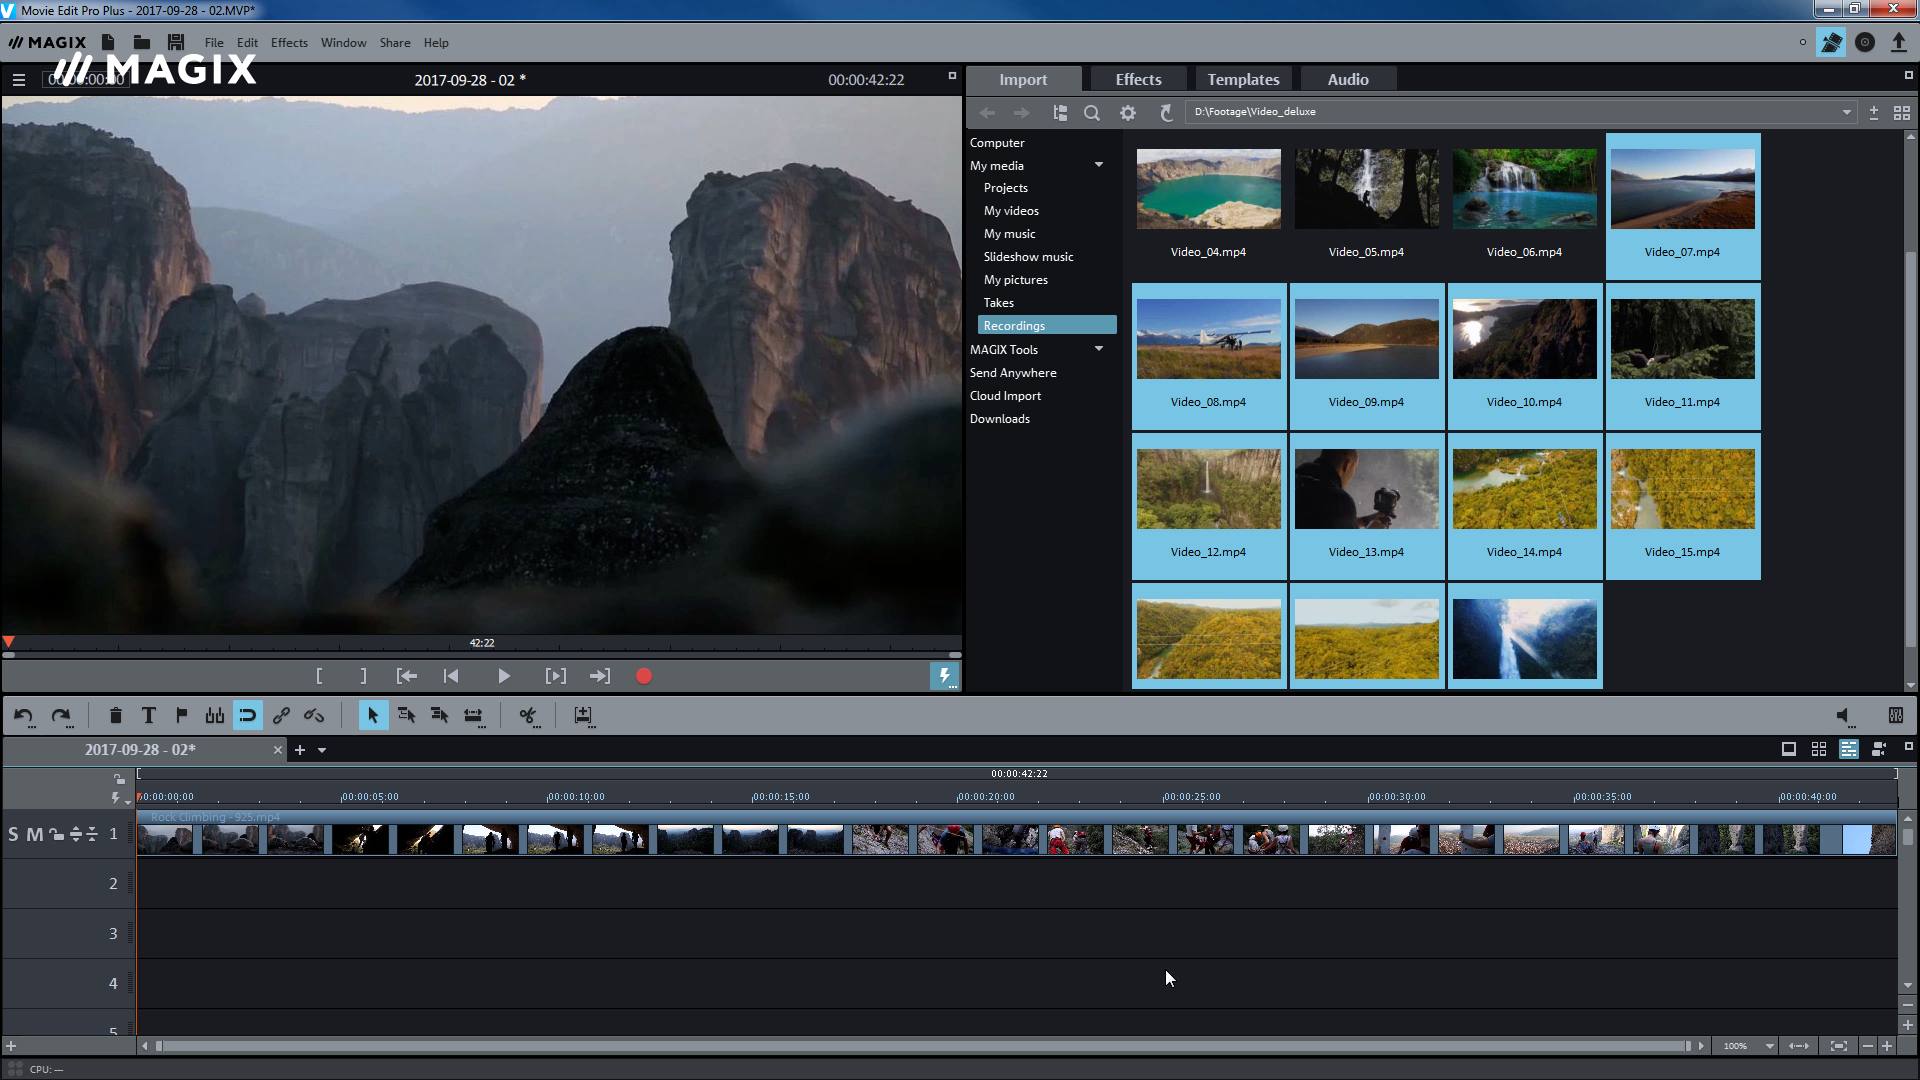 Video editing: with the right software & helpful tips